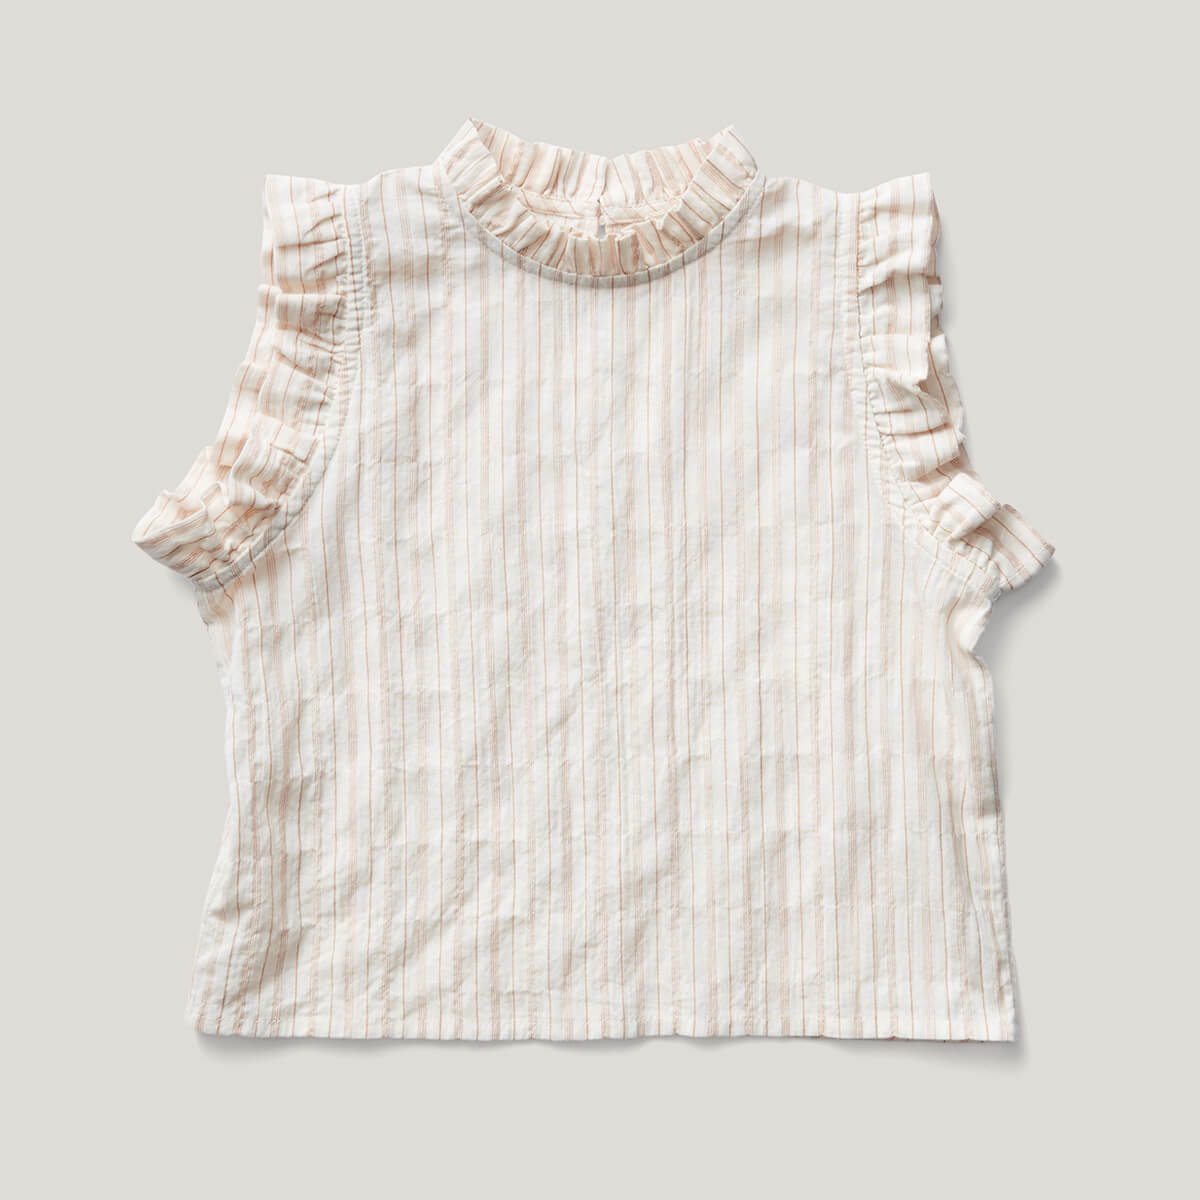 Thelma Camisole in Chalk Stripe by Soor Ploom